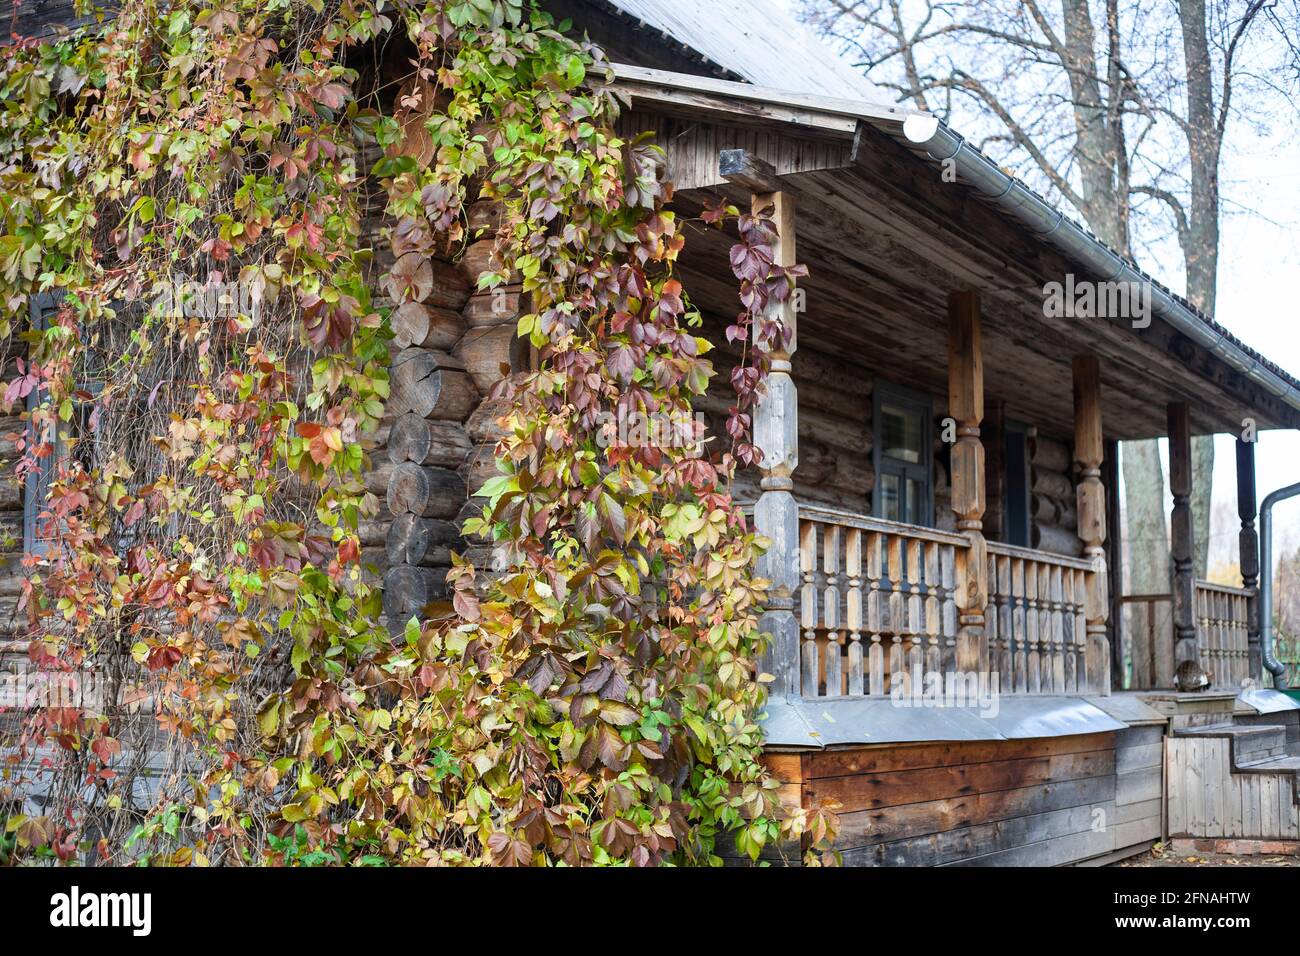 The plant wrapped around the hedge. The veranda is all overgrown with plants. Decoration of a country house hedge. Stock Photo